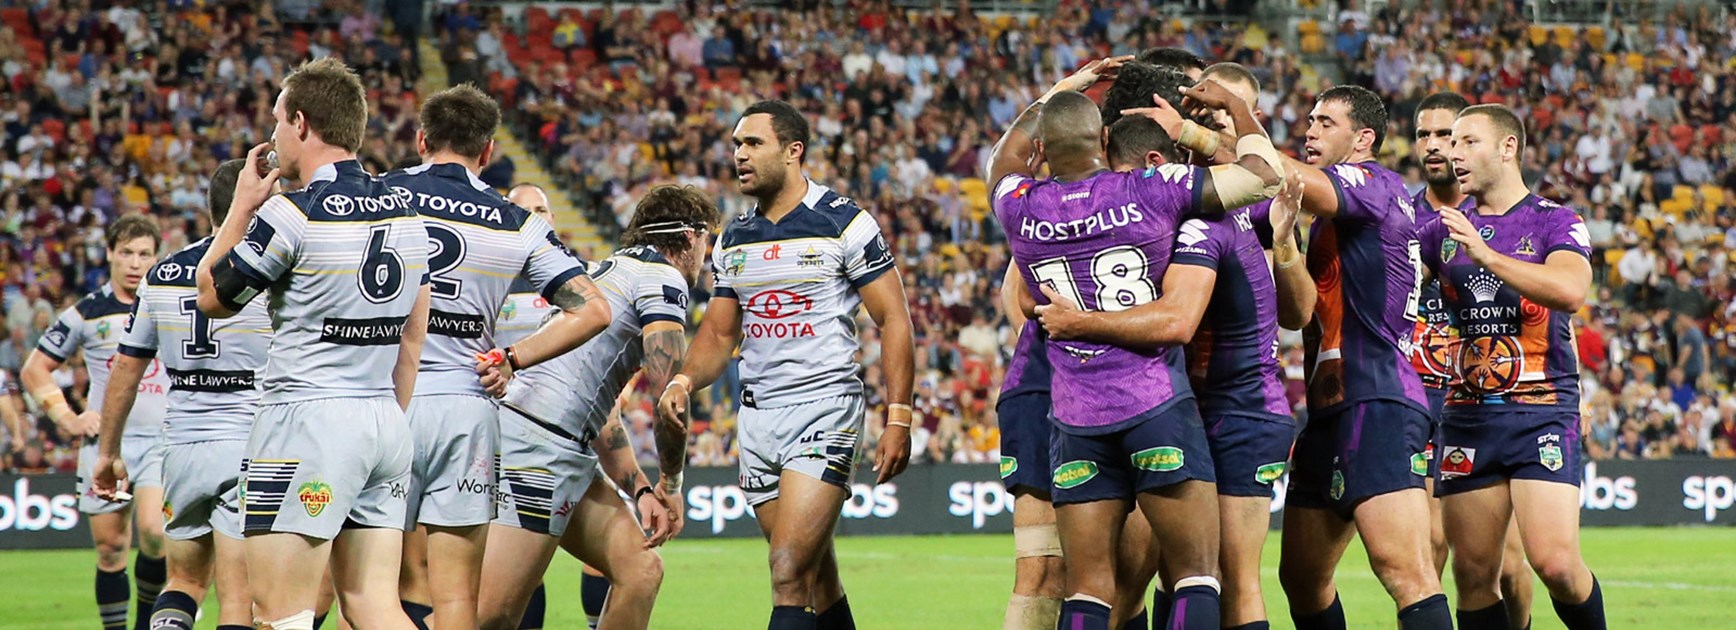 Contrasting emotions as the Storm got the better of the Cowboys in Round 10.